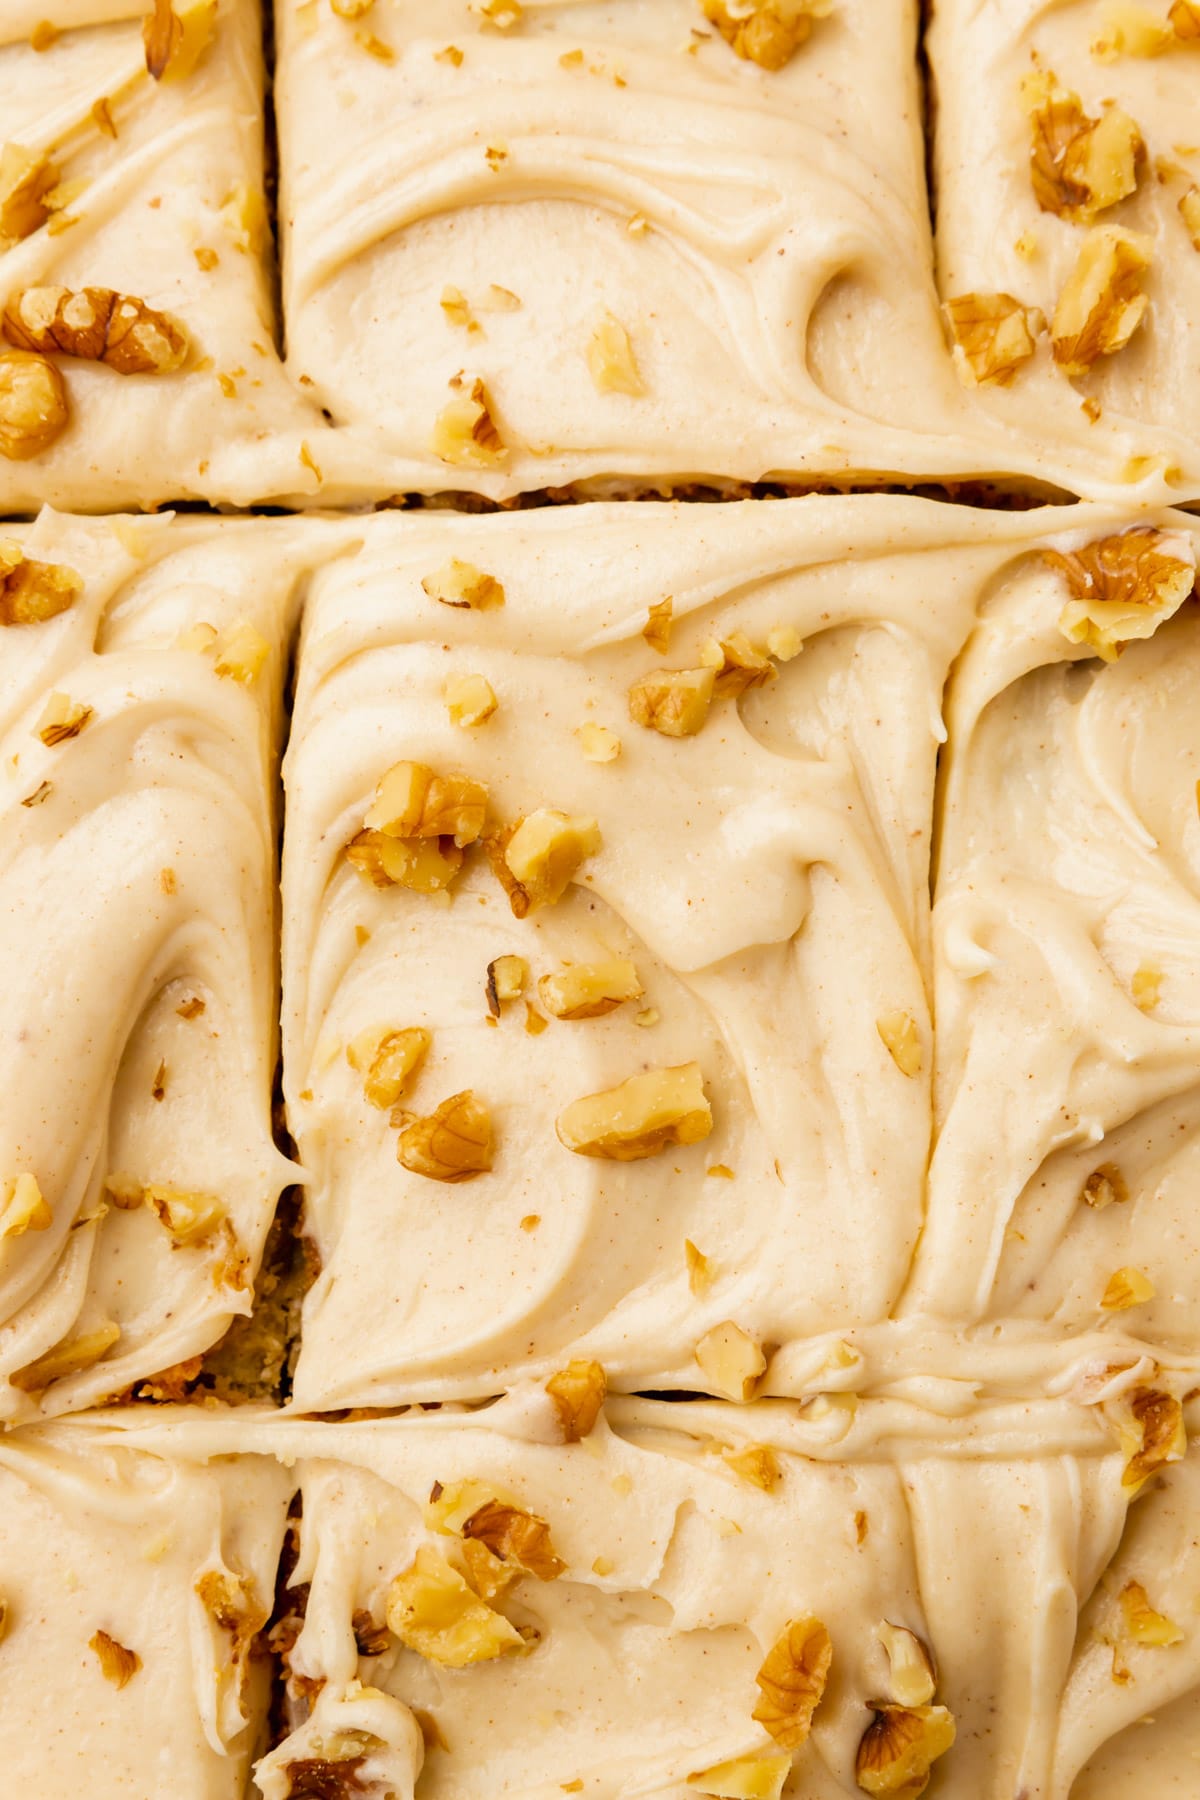 A closeup of cream cheese frosted cake slices topped with chopped walnuts.